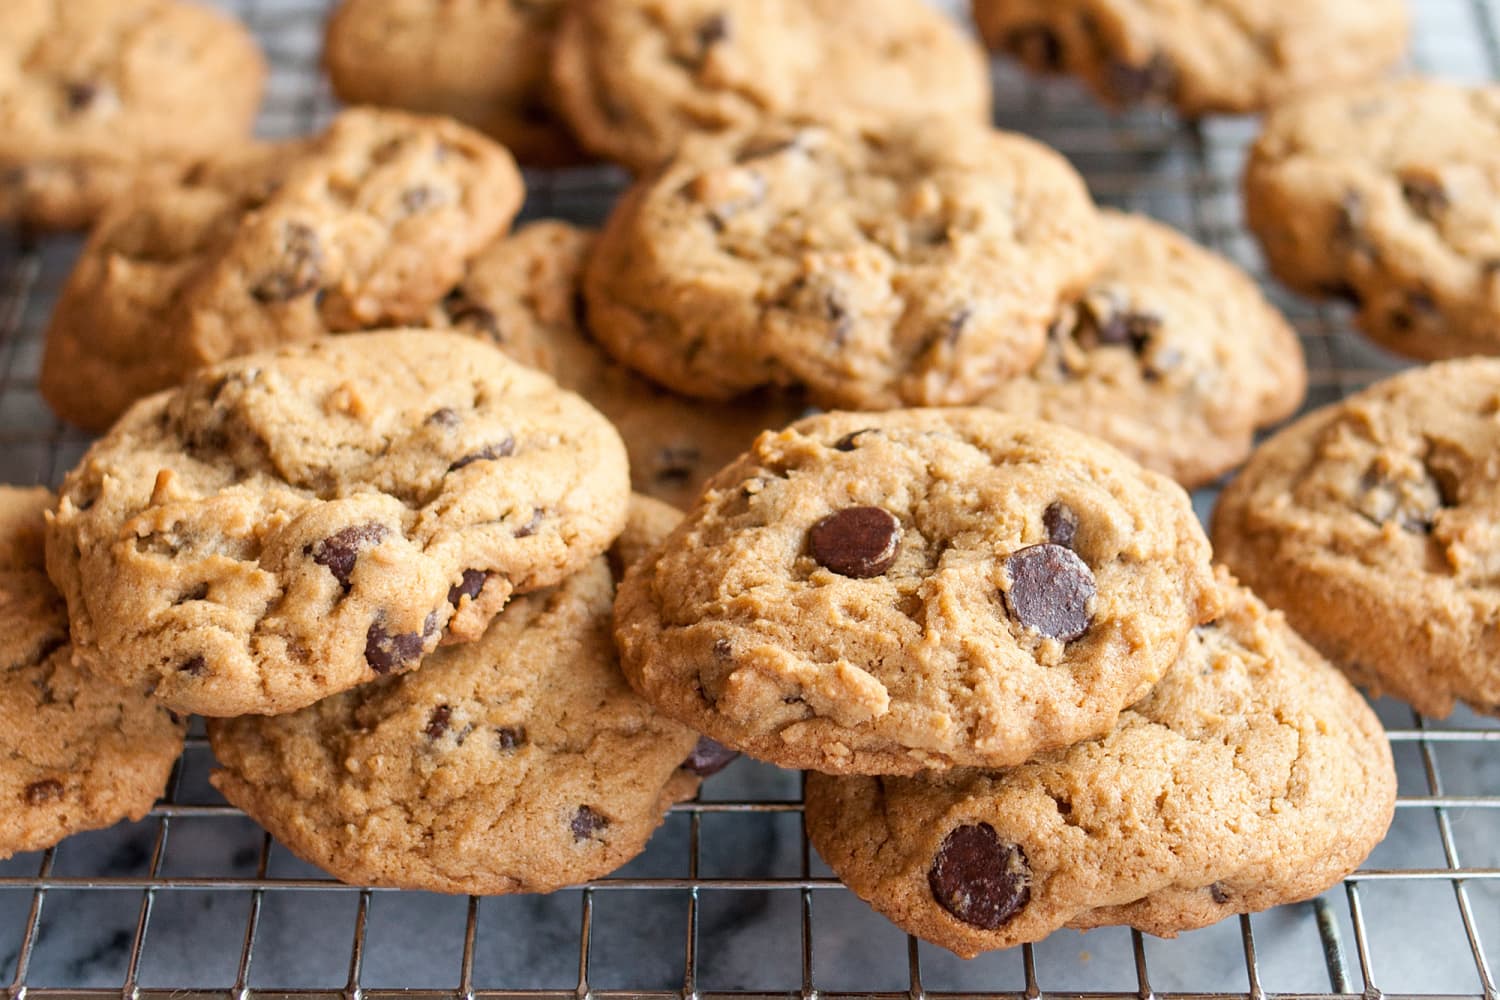 How To Make Chocolate Chip Cookies from Scratch